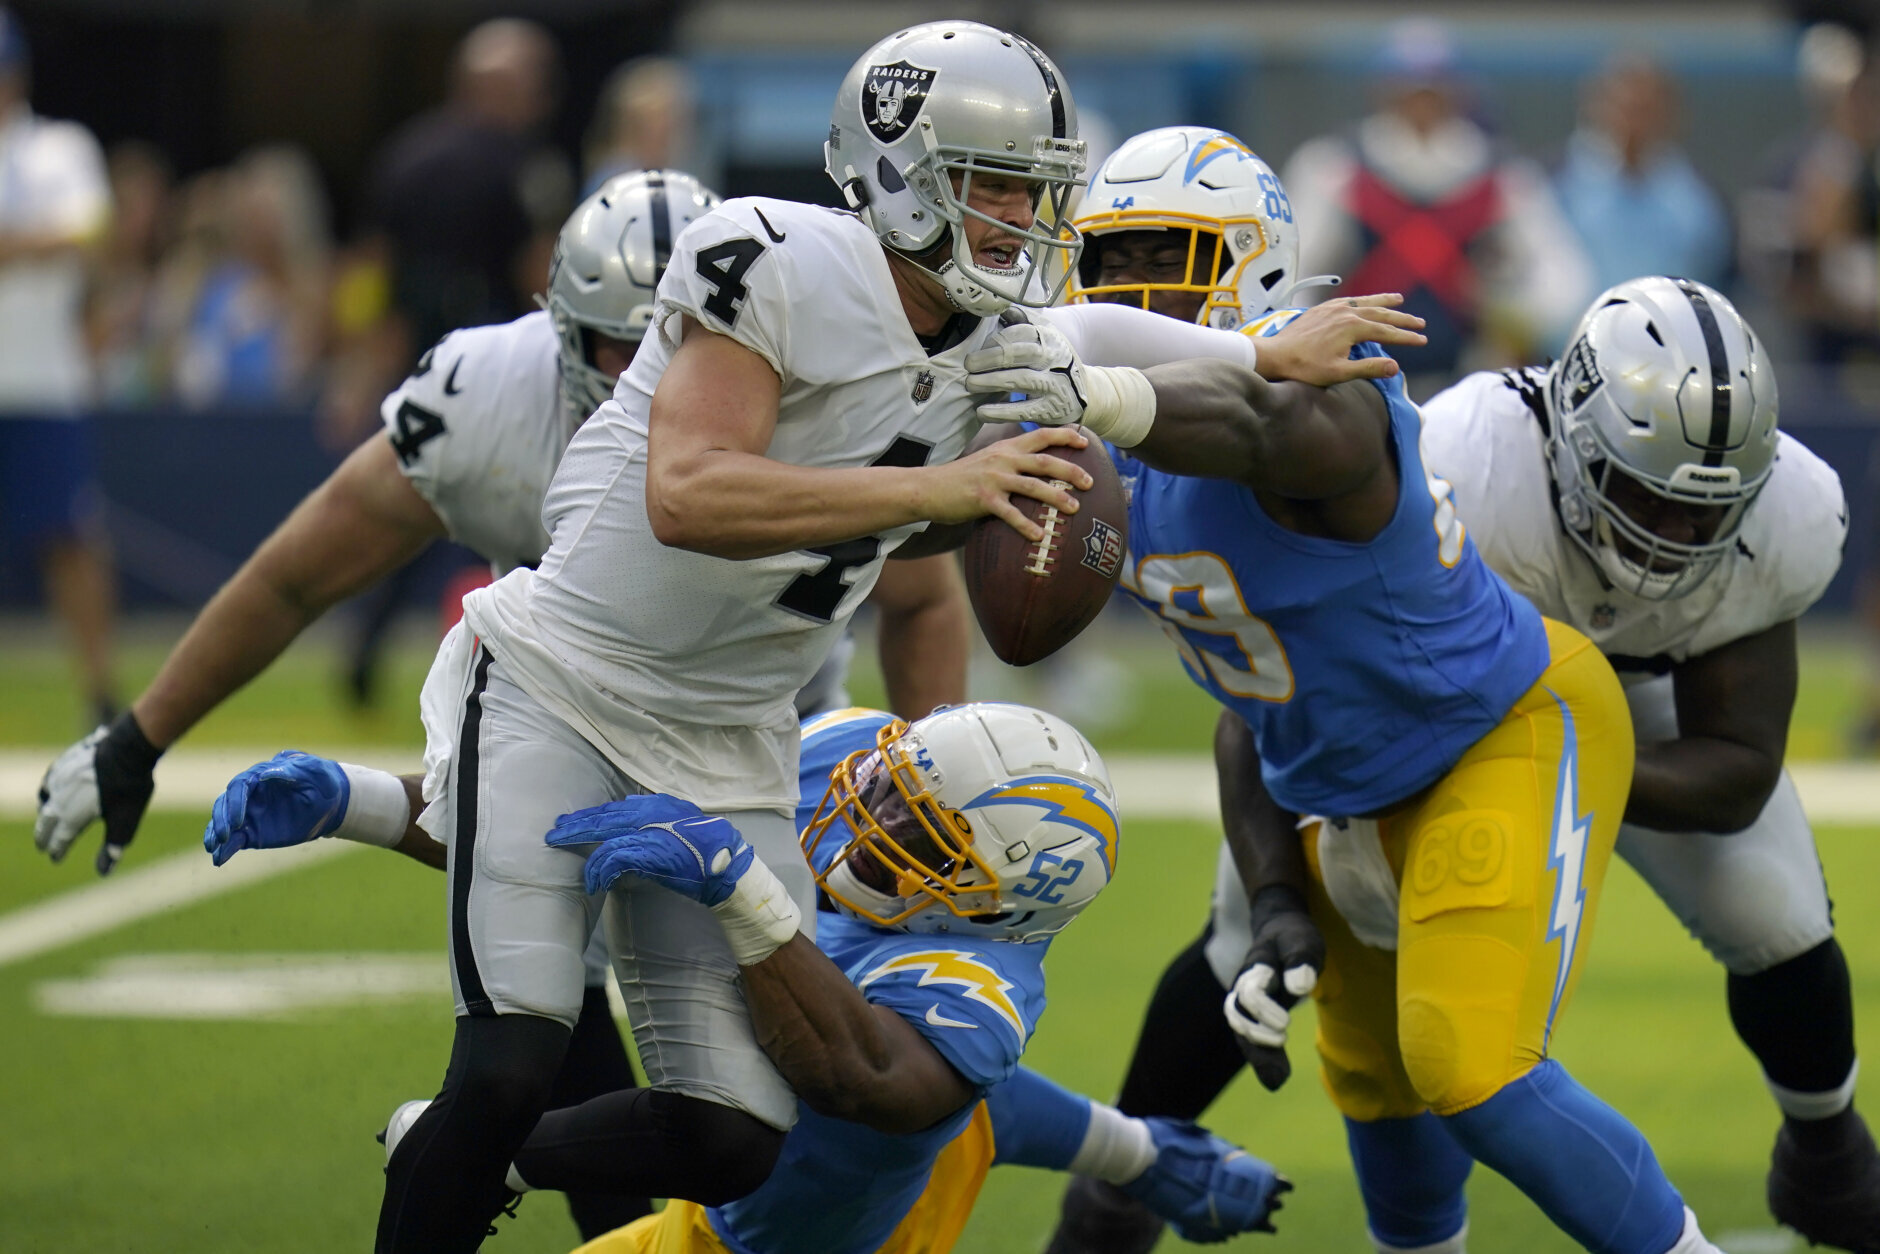 <p><b><i>Raiders 19</i></b><br />
<b><i>Chargers 24</i></b></p>
<p><a href="https://profootballtalk.nbcsports.com/2022/09/10/khalil-mack-on-facing-raiders-derek-carr-is-my-brother-guys-i-didnt-like-arent-there-anymore/" target="_blank" rel="noopener">For a guy not playing with a grudge against his old team</a>, Khalil Mack sure did wreck his buddy Derek Carr. This game seems like a microcosm of what football season in Las Vegas will be: Carr putting up some nice stats throwing to his real buddy, Devante Adams, but the Raiders coming up on the losing end of the proverbial AFC West stick.</p>
